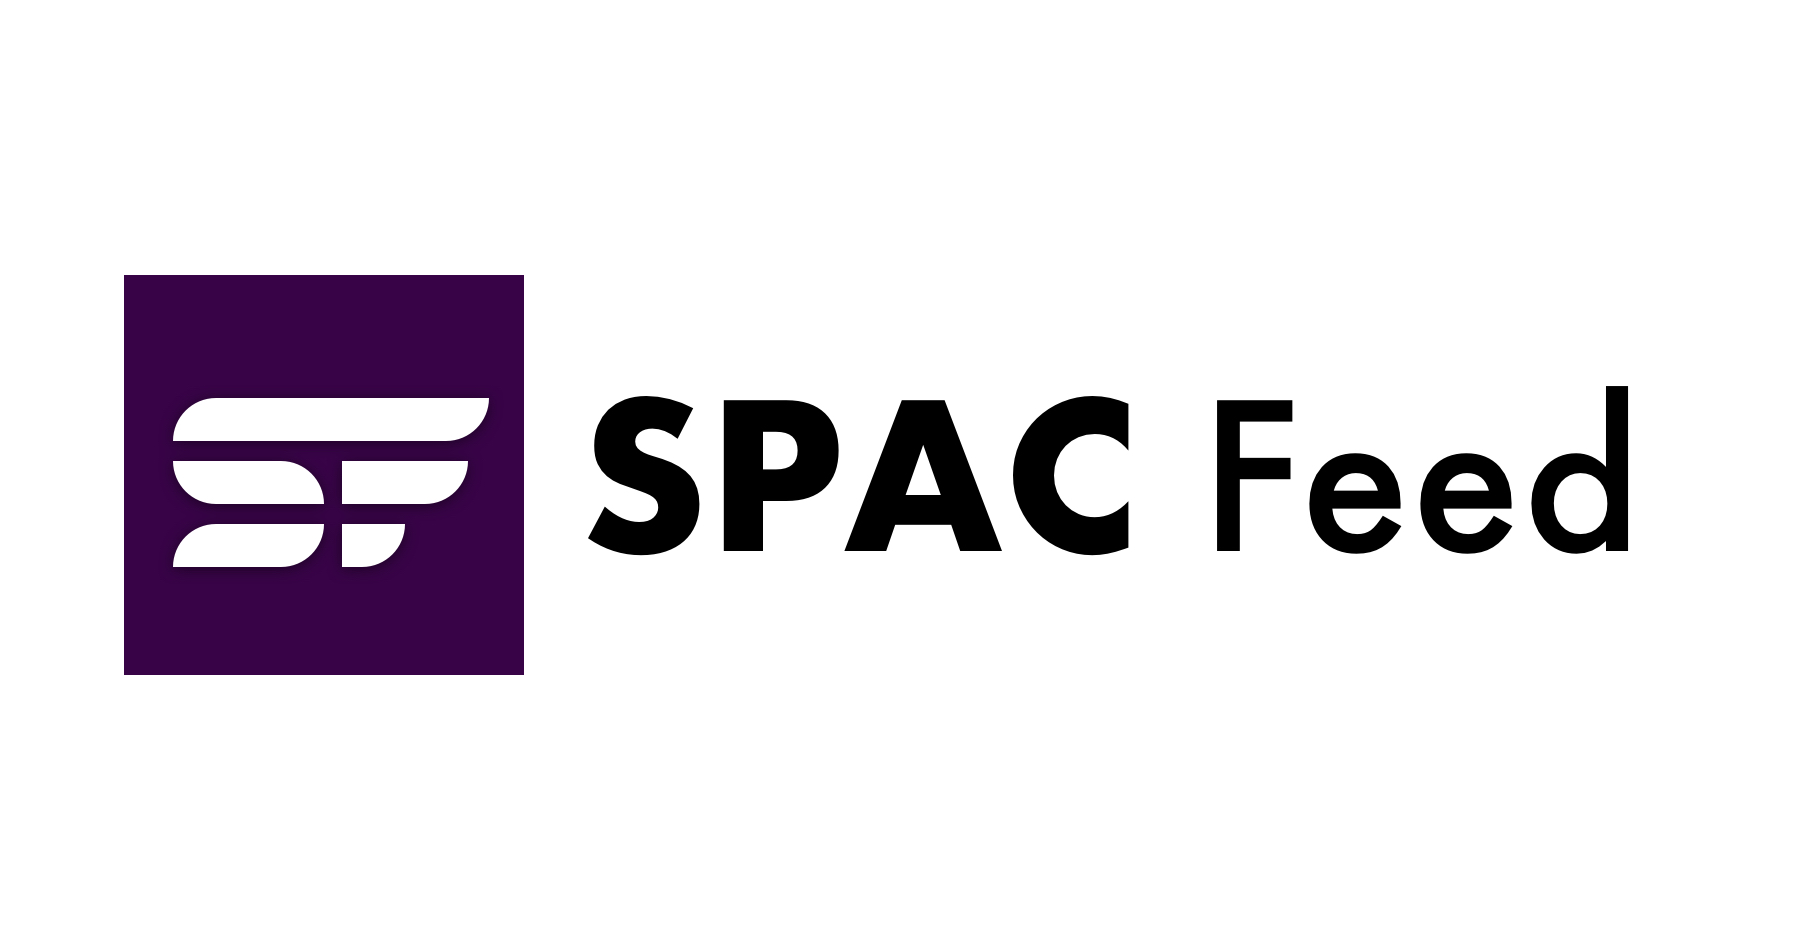 Was it SPAC week? SEC charges SPAC with misleading statements | SPAC Feed